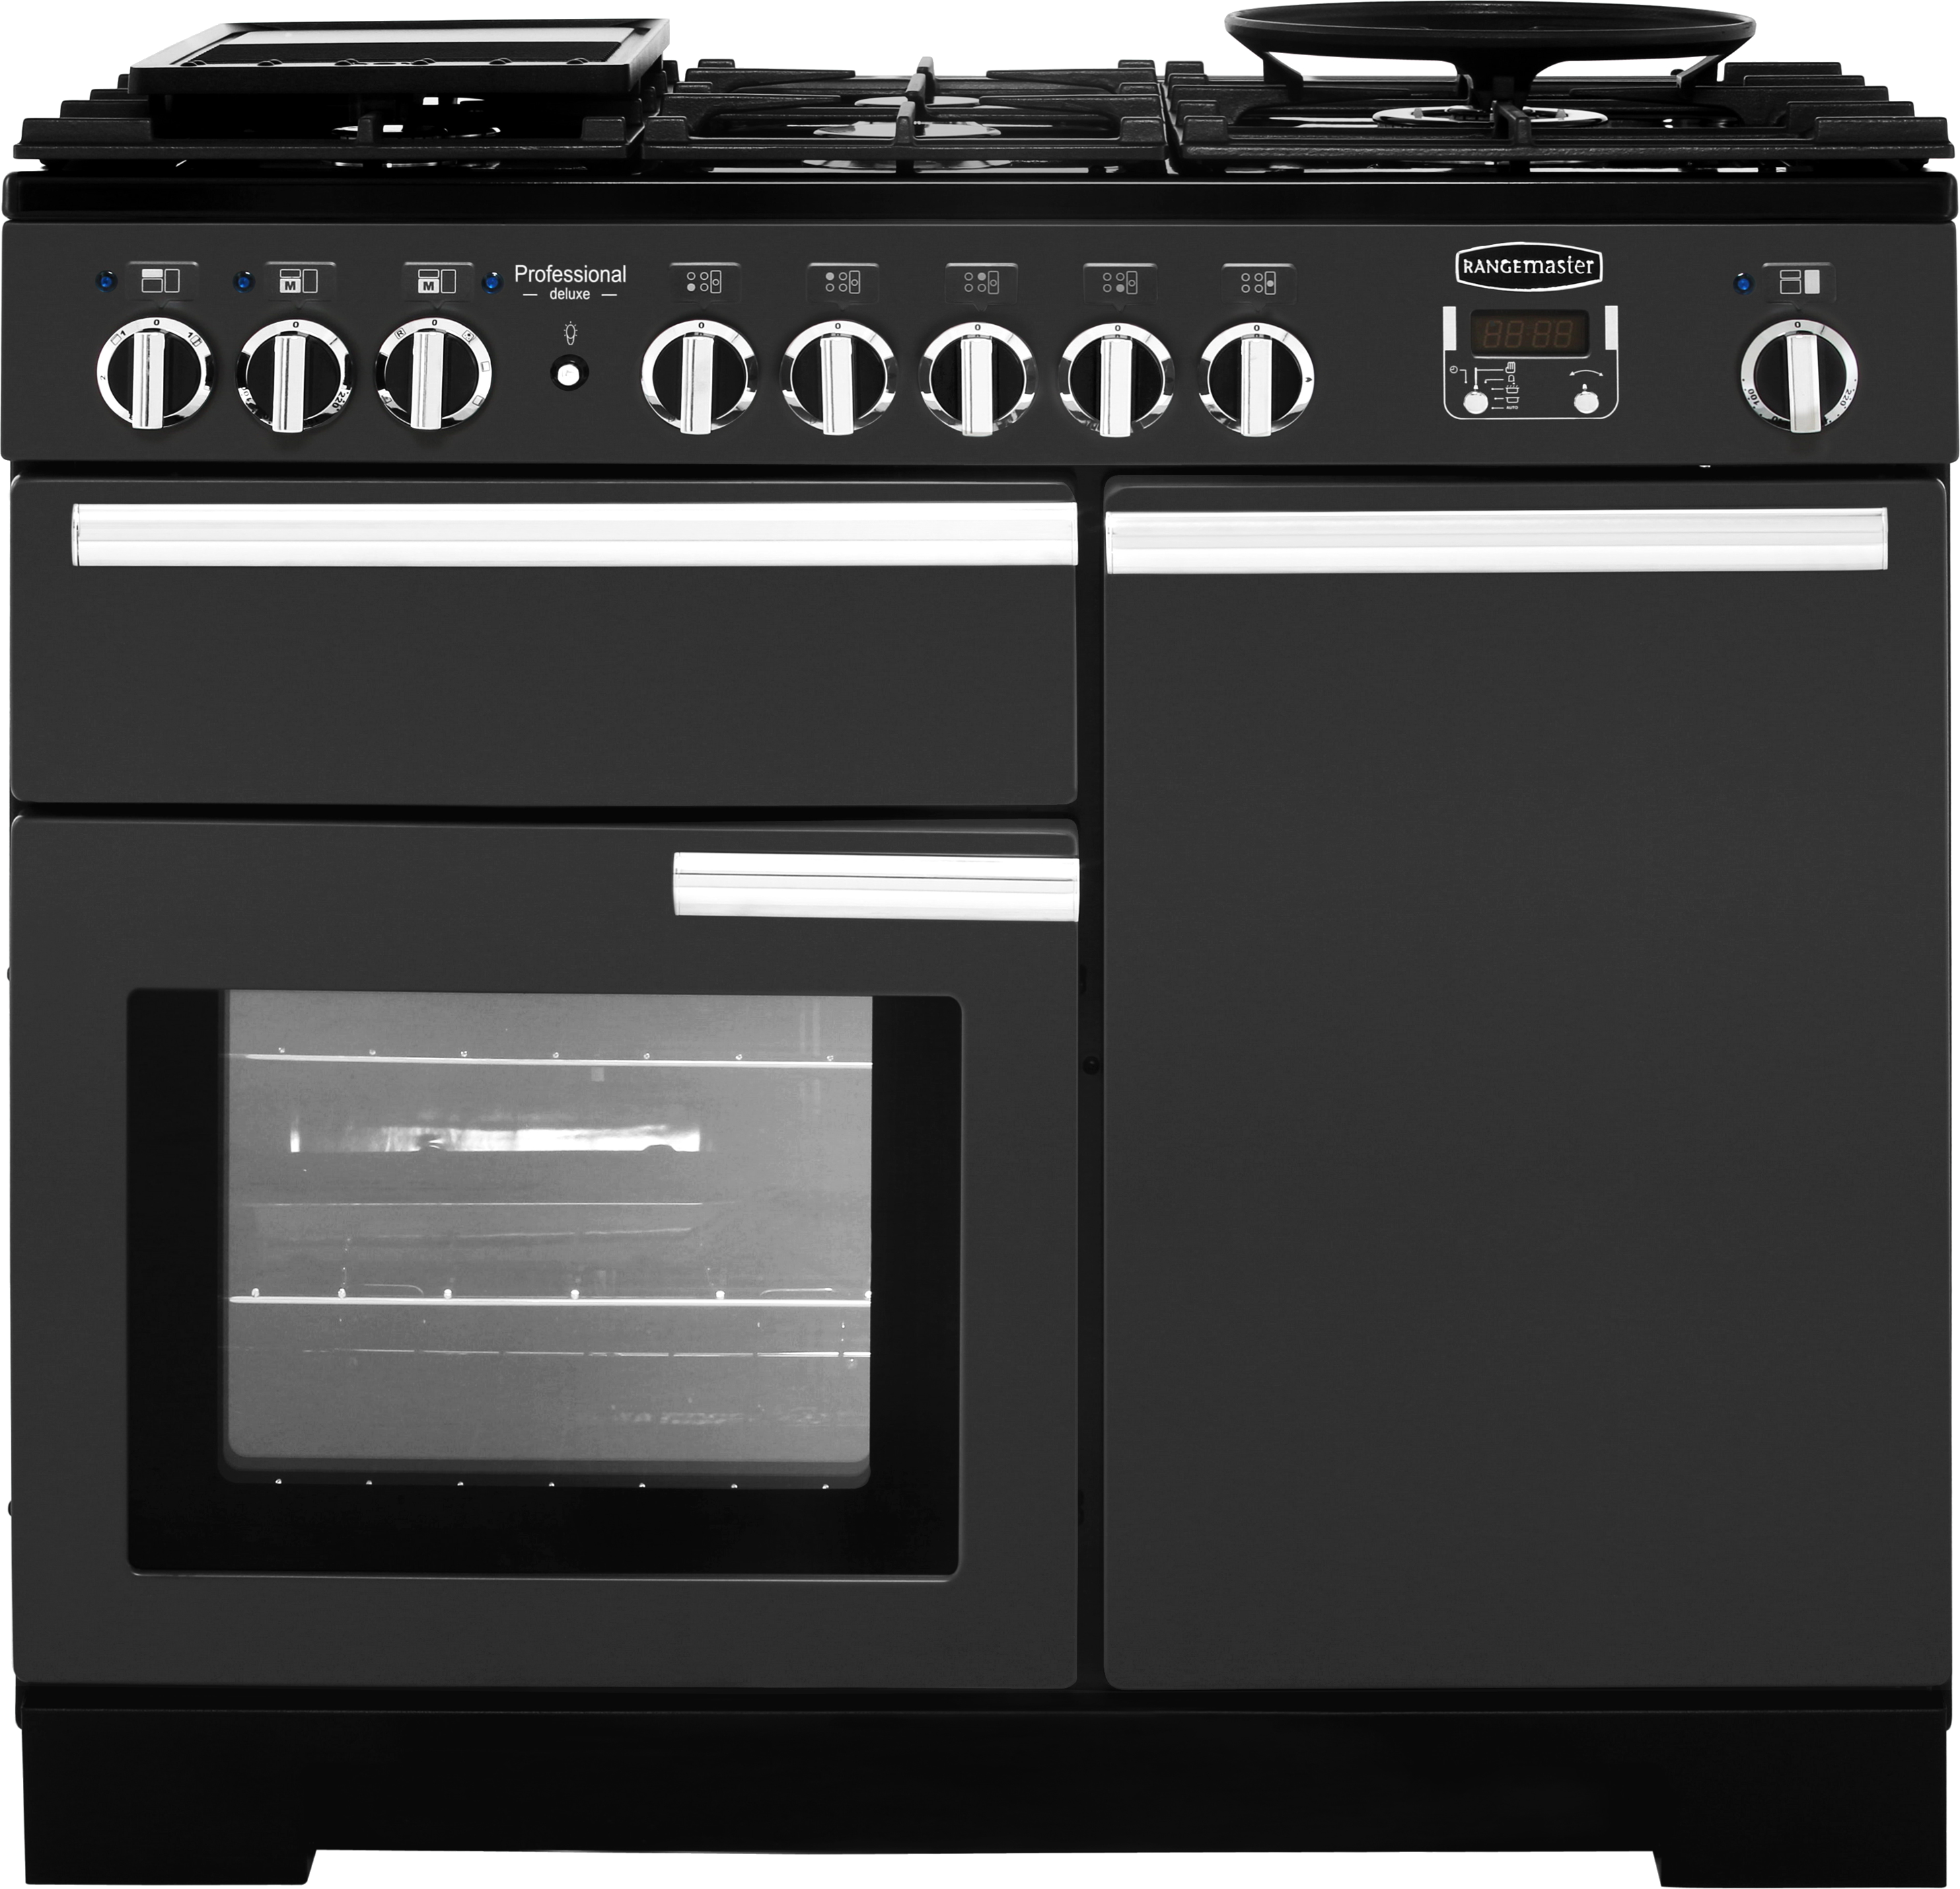 Rangemaster Professional Deluxe PDL100DFFSL/C 100cm Dual Fuel Range Cooker - Slate - A/A Rated, Graphite